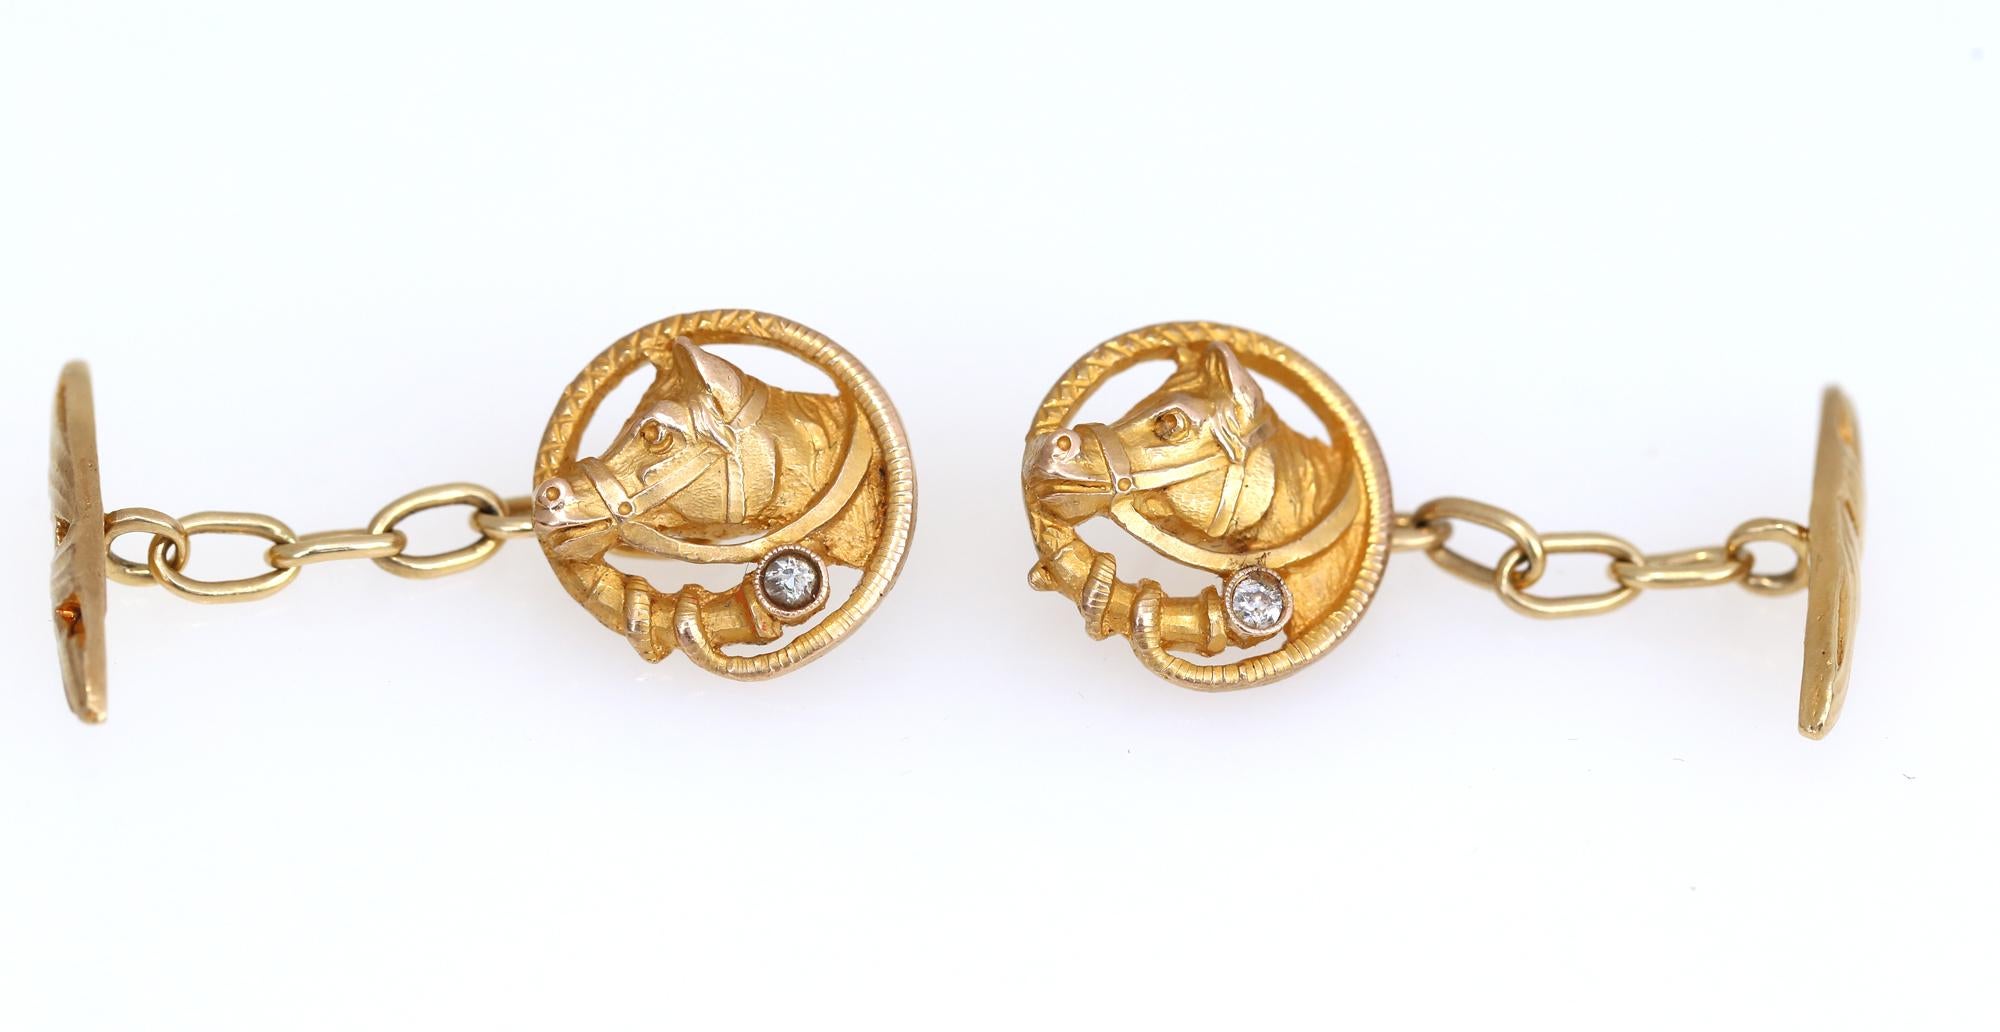 Cufflinks depicting a horse head in fine details. 18K Gold with small Diamonds. Art Nouveau, beginning of the 20th century.  Very delicate work
Perfect present for Fathers day.


Stamped: 18K C.F.C. 39
Weight: 10 gm
Length: 35mm  (1.1 inch)
